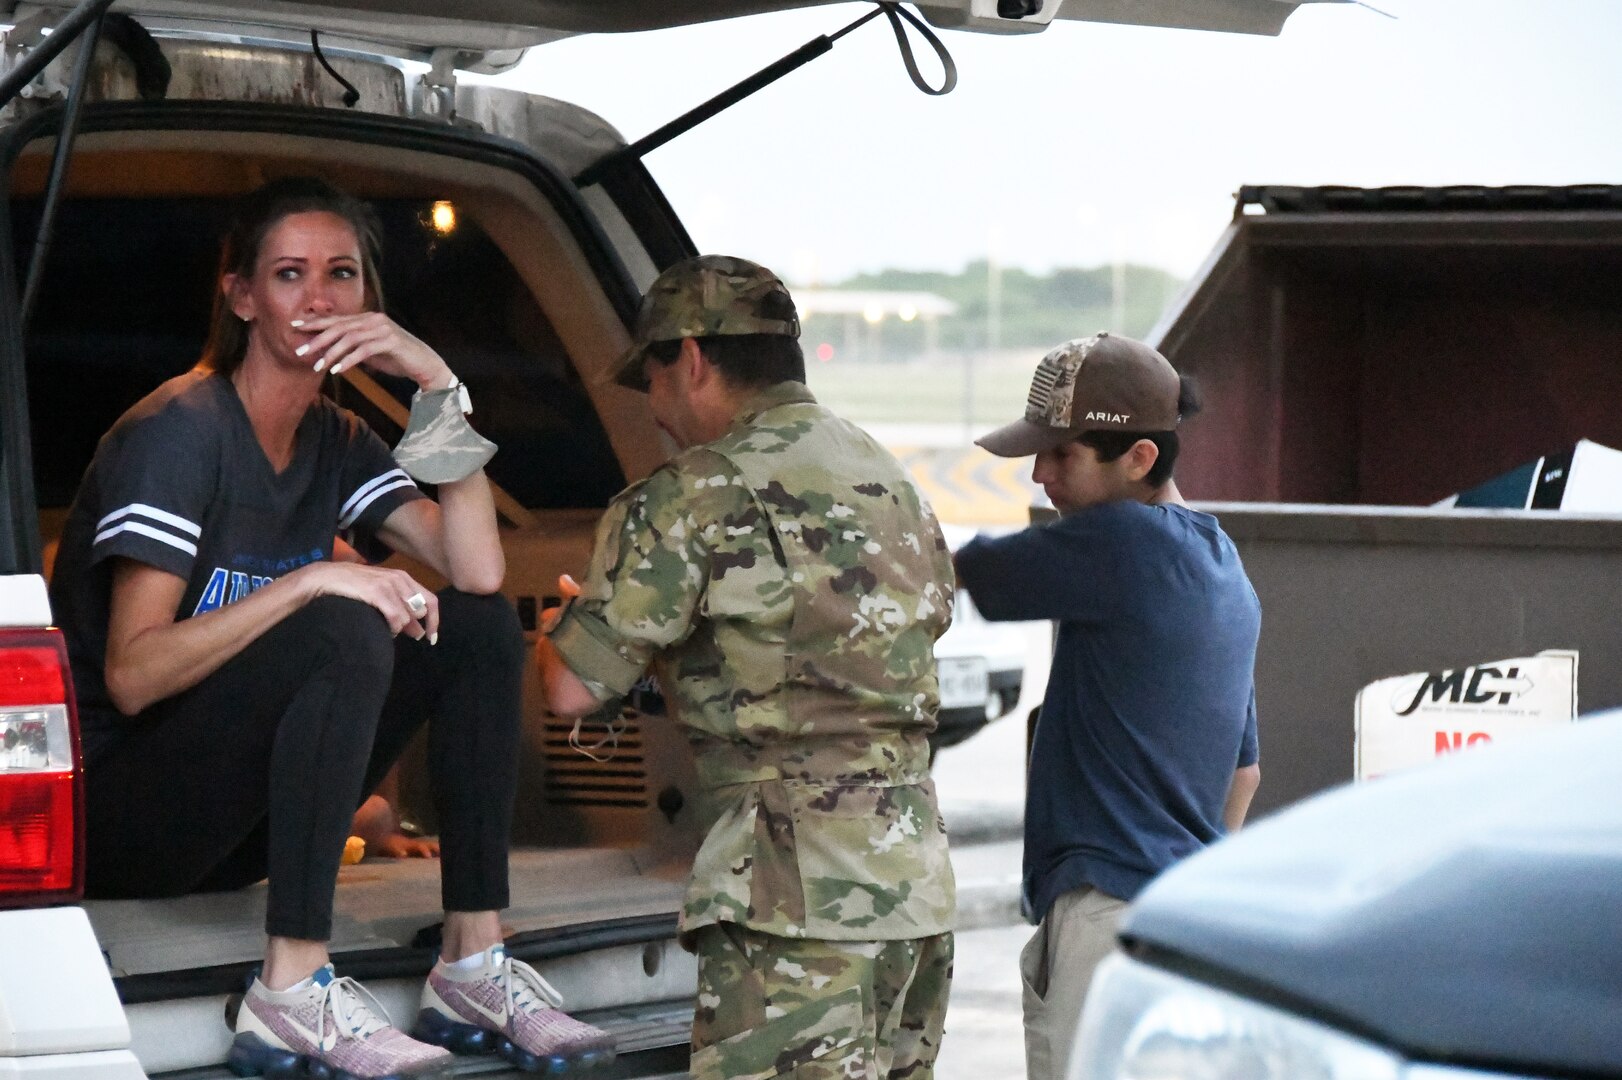 Tech. Sgt. Brian Ynclan, 433rd Civil Engineer Squadron firefighter, spends a few moments with his family before leaving for a deployment June 28, 2020, at Joint Base San Antonio-Lackland, Texas.